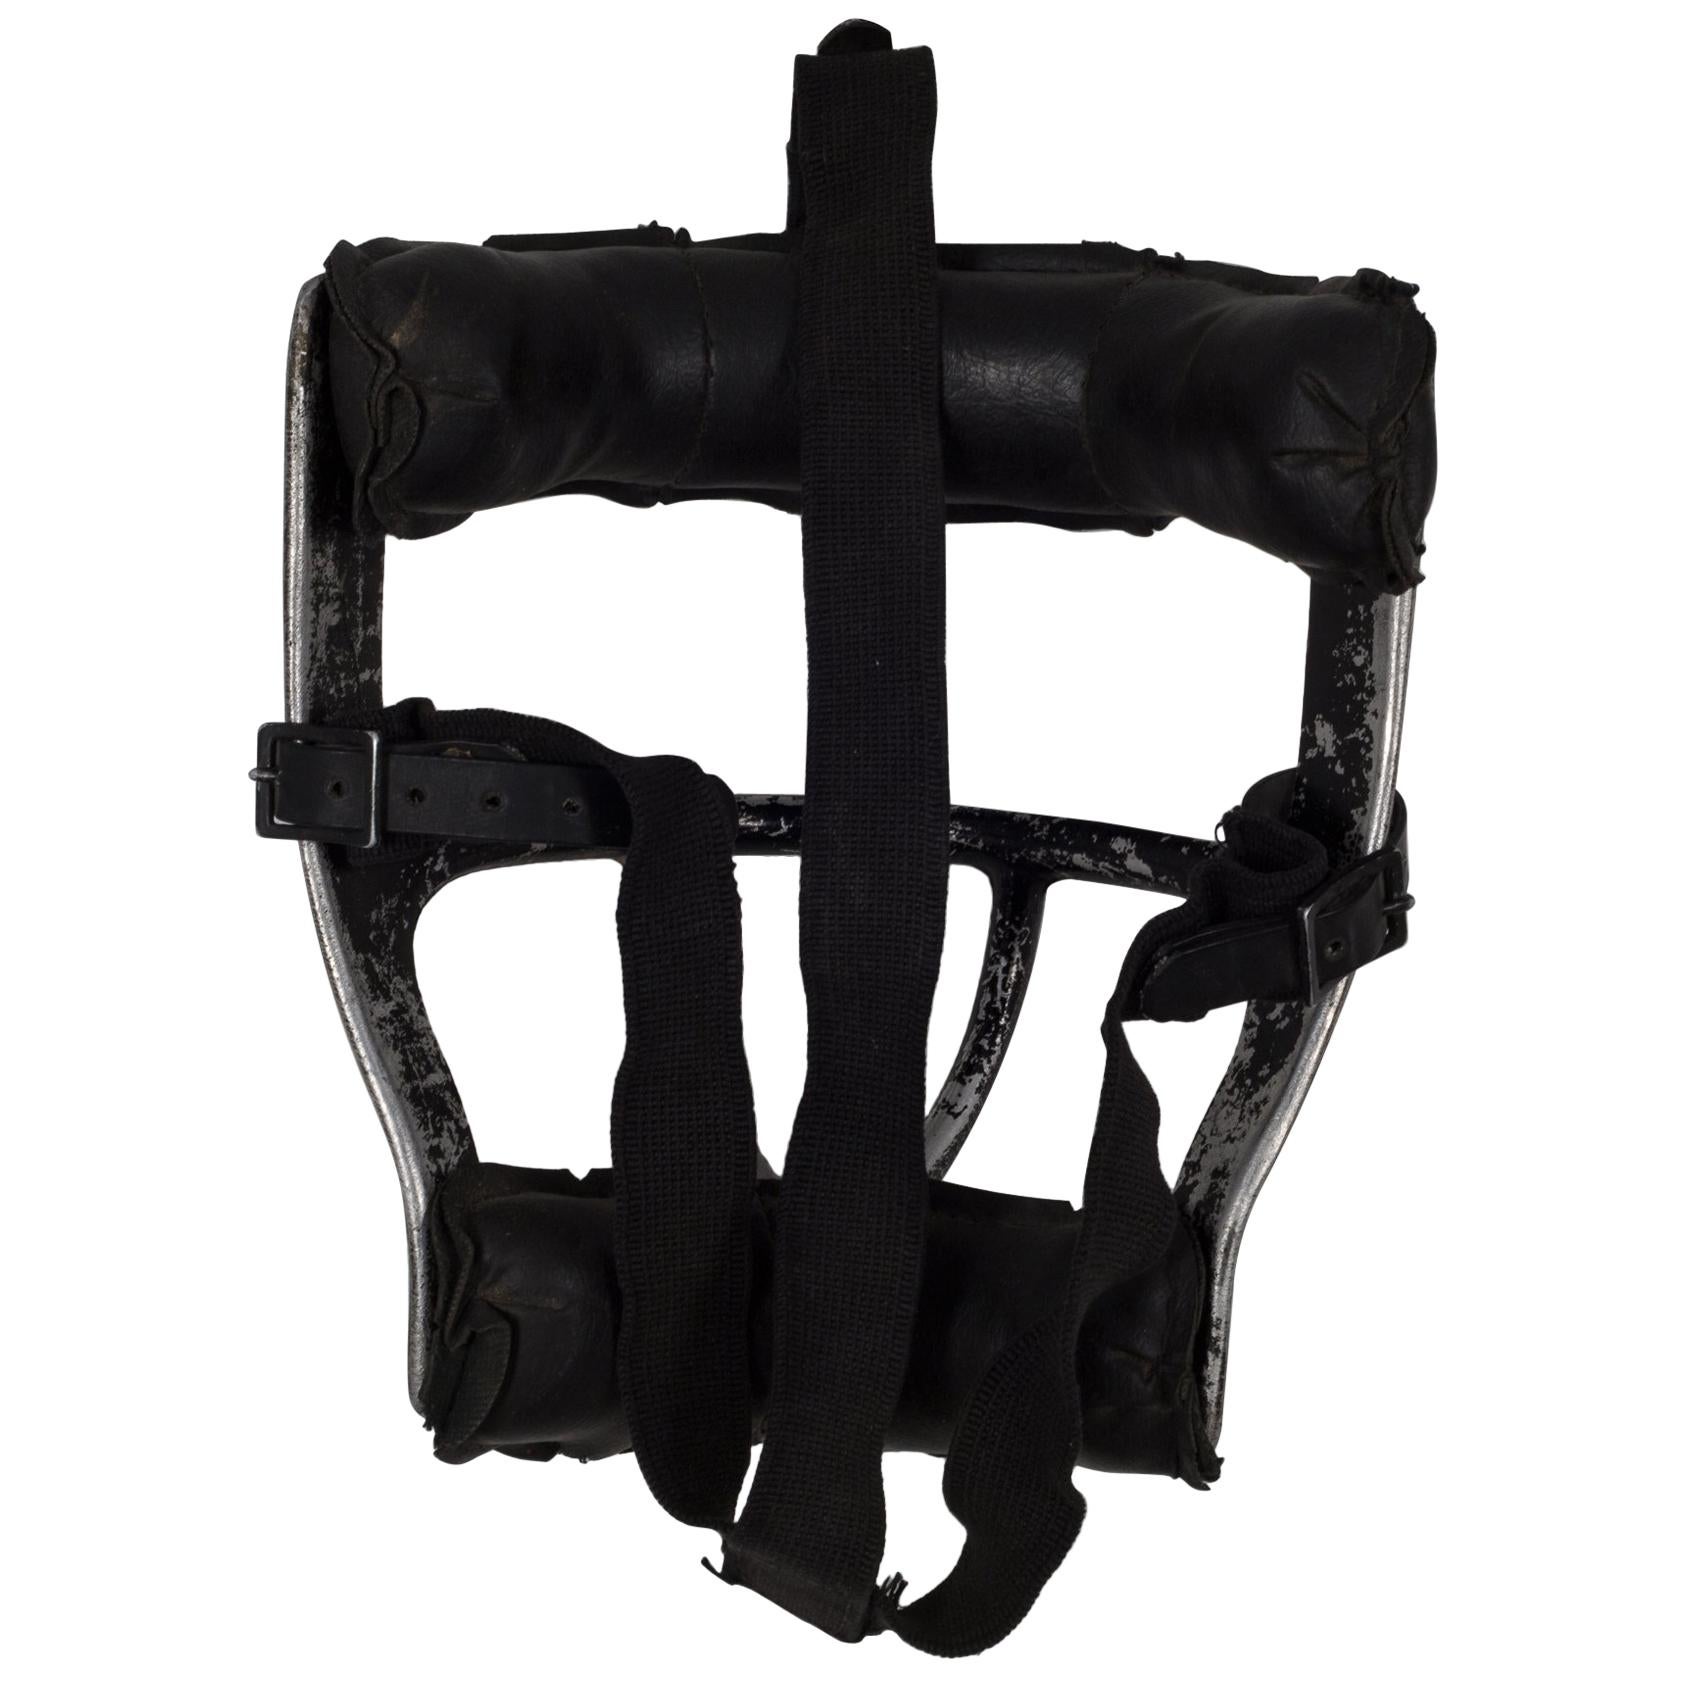 About

This is an original vintage catcher's mask. The main body is aluminum with thick, black leather padding. The padding is held onto the body of the mask by leather straps with brass snaps. The piece has retained most of it's original finish